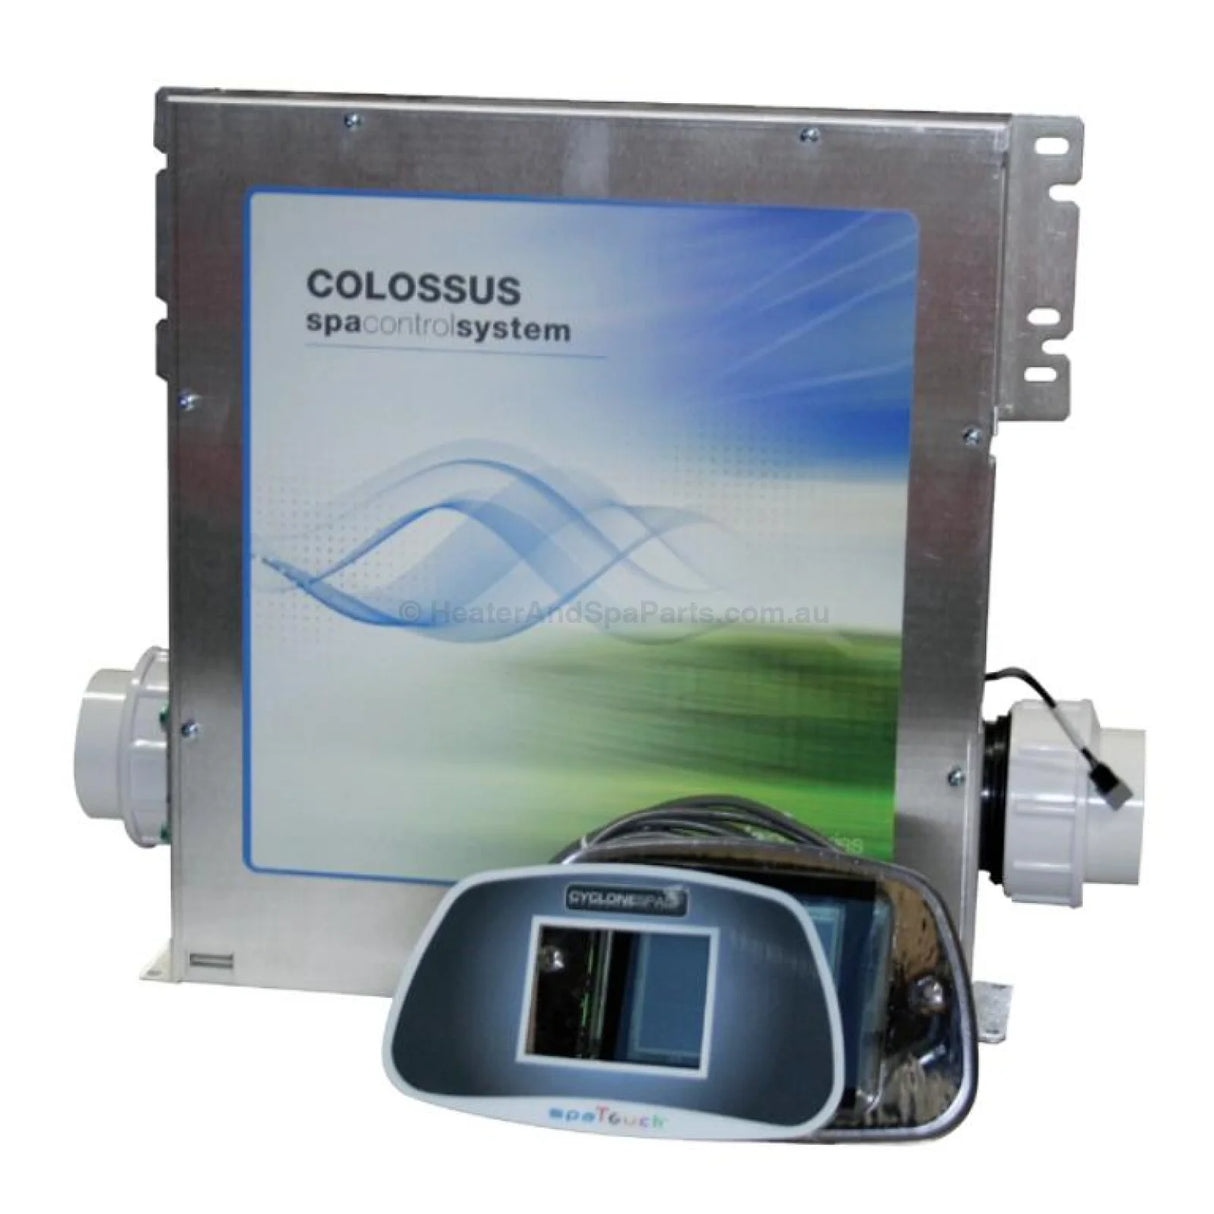 Balboa Colossus Control System & Spare Parts - Heater and Spa Parts